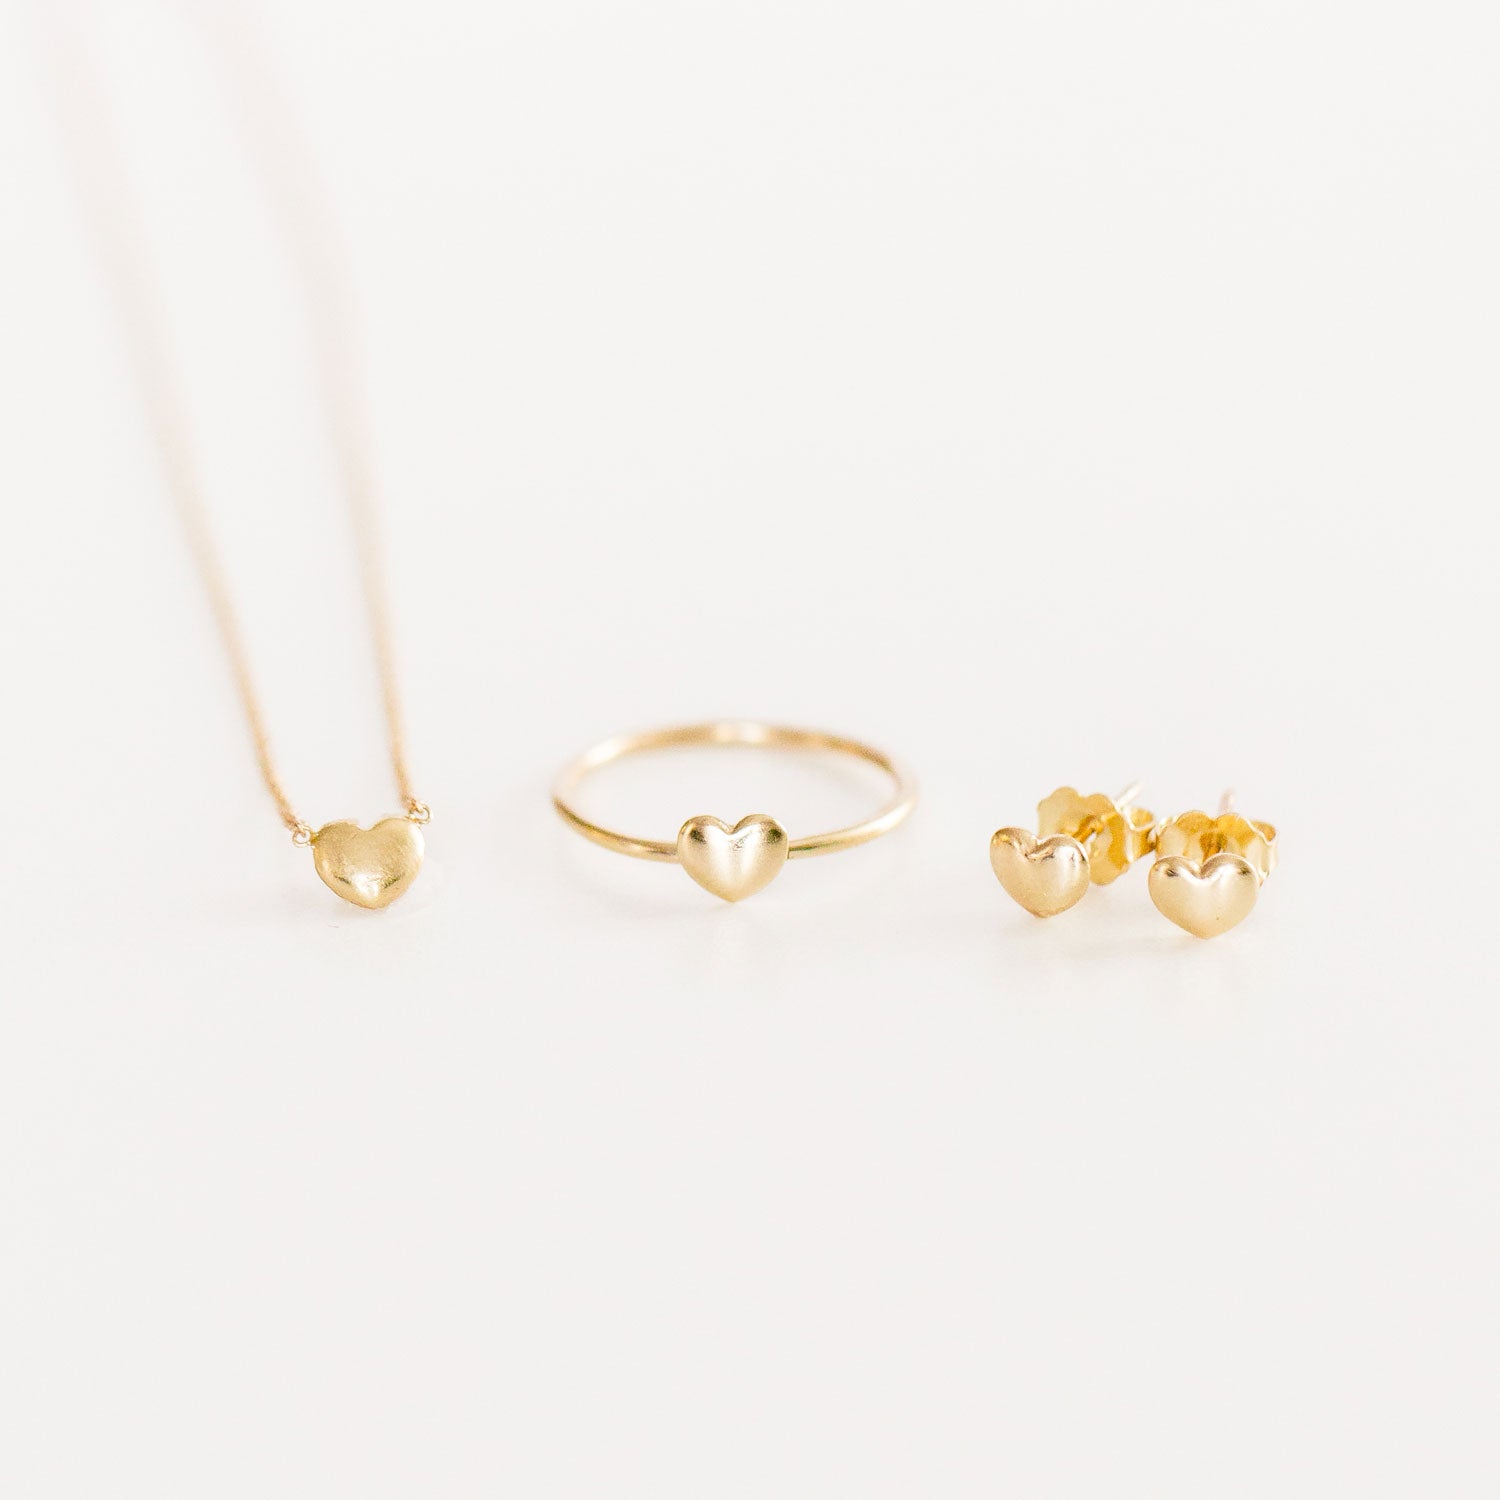 14K Puff Heart Necklace + Ring + Studs Set